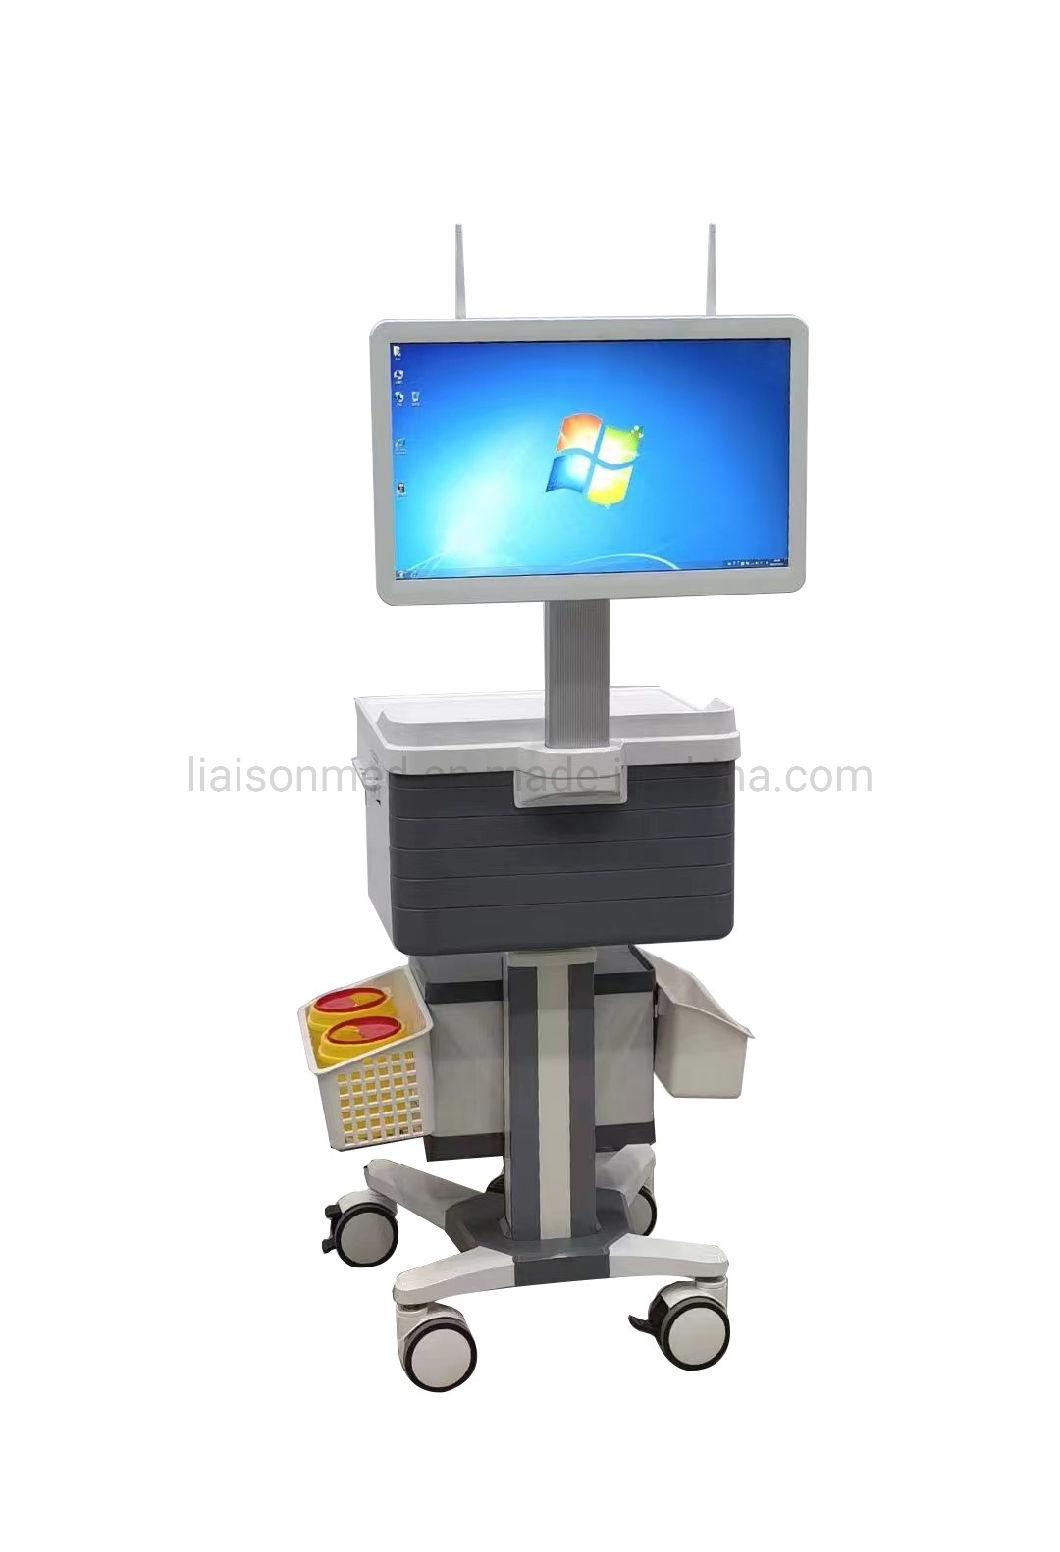 Mn-CPU001 Hospital Trolley ABS Plastic Medical Treatment Tablet Computer Trolley with Locking